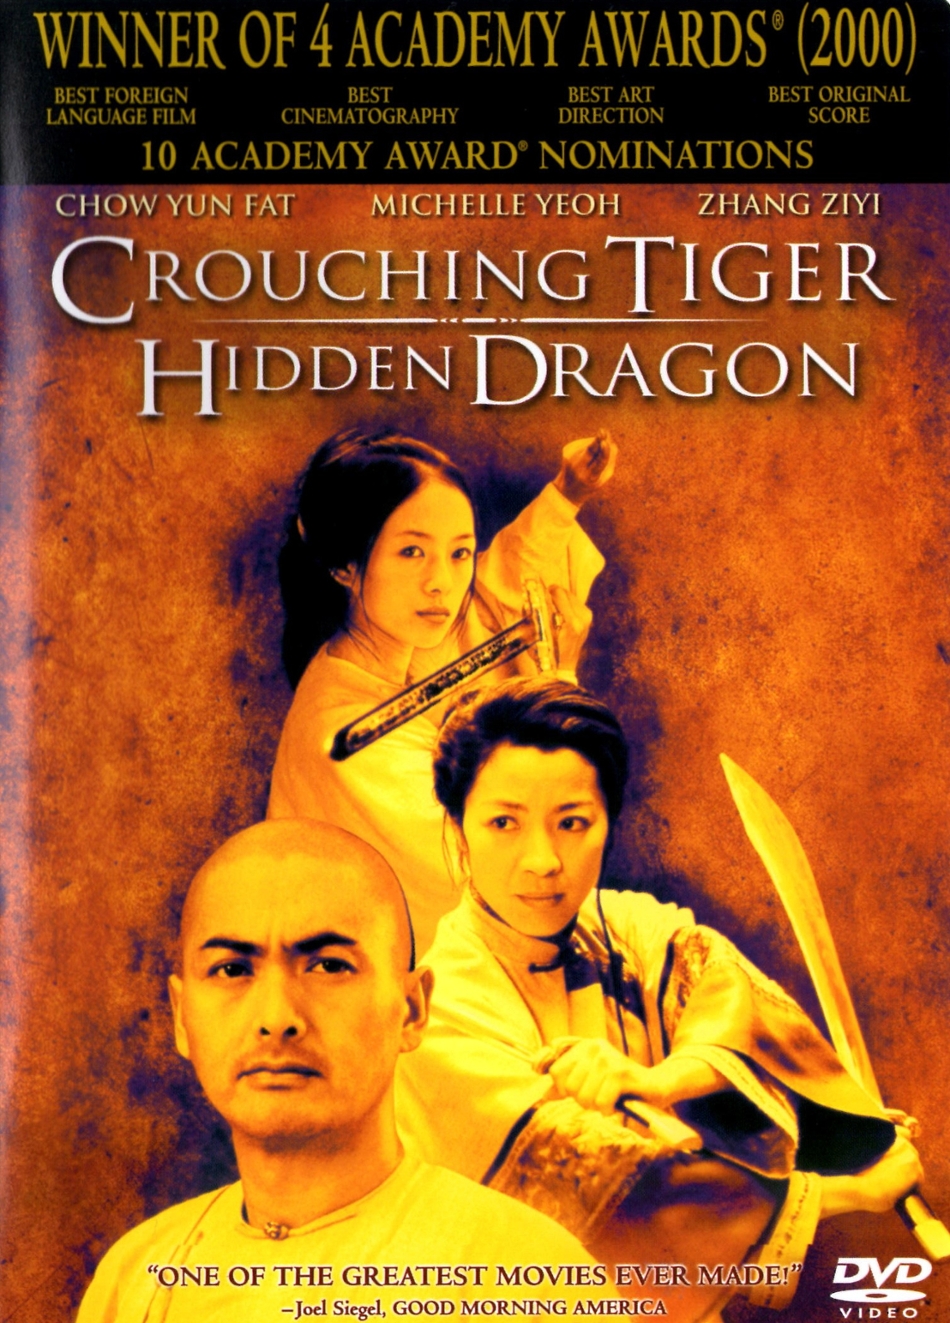 The University of Scranton and Marywood University will co-present the showing of  “Crouching Tiger, Hidden Dragon” by director Ang Lee at Marywood University’s Swartz Center for Spiritual Life on Friday, Nov. 14, at 6:45 p.m.